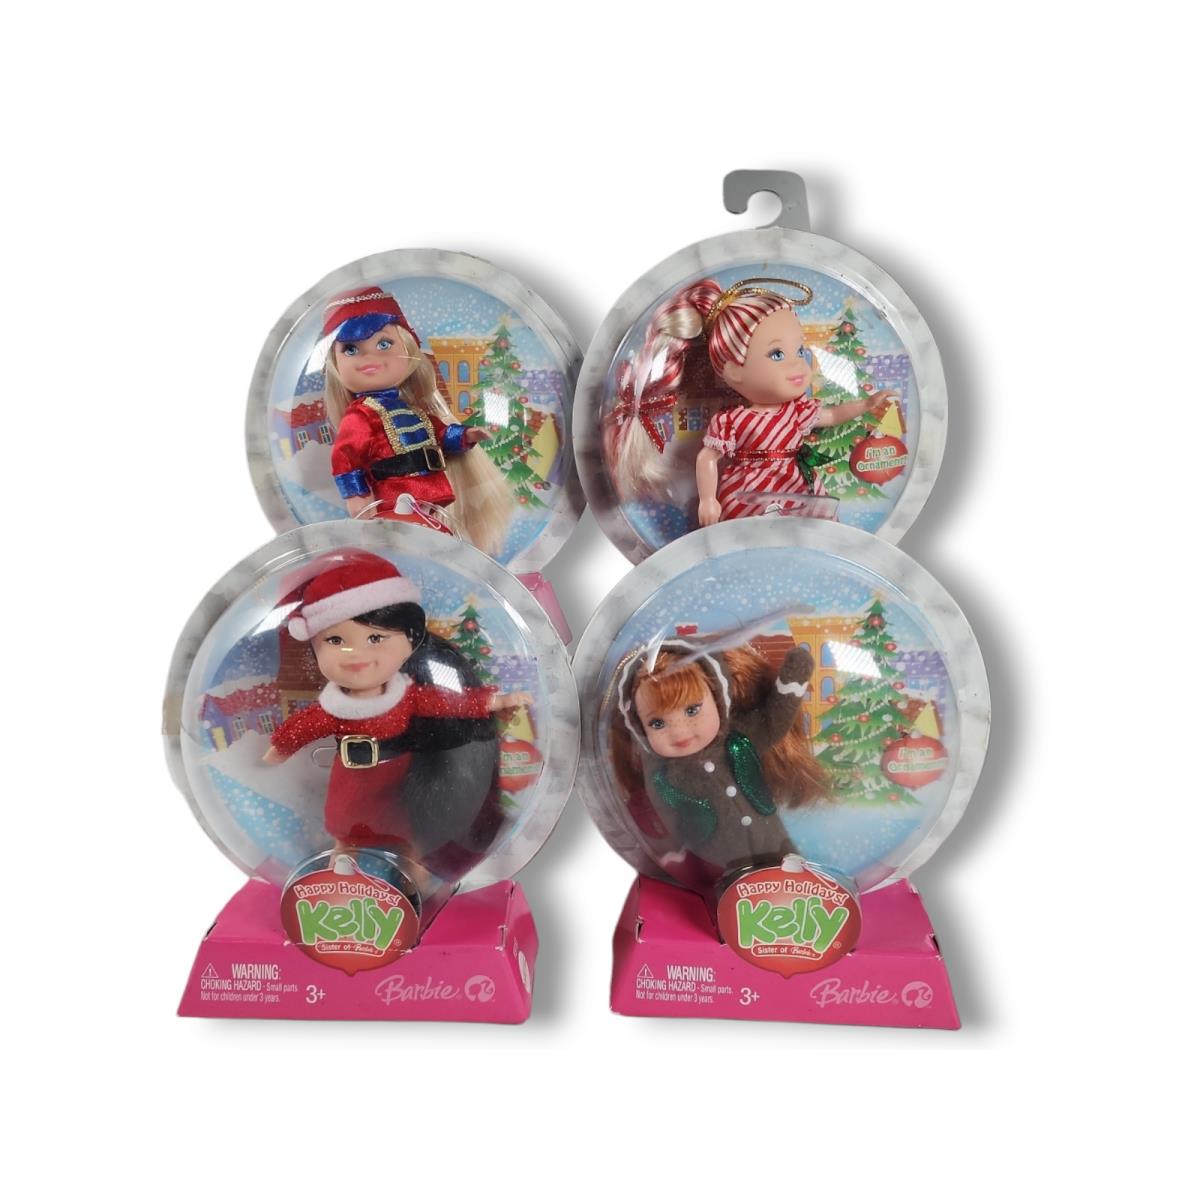 Complete Set Of 4 2006 Barbie Kelly Happy Holidays Doll Ornaments